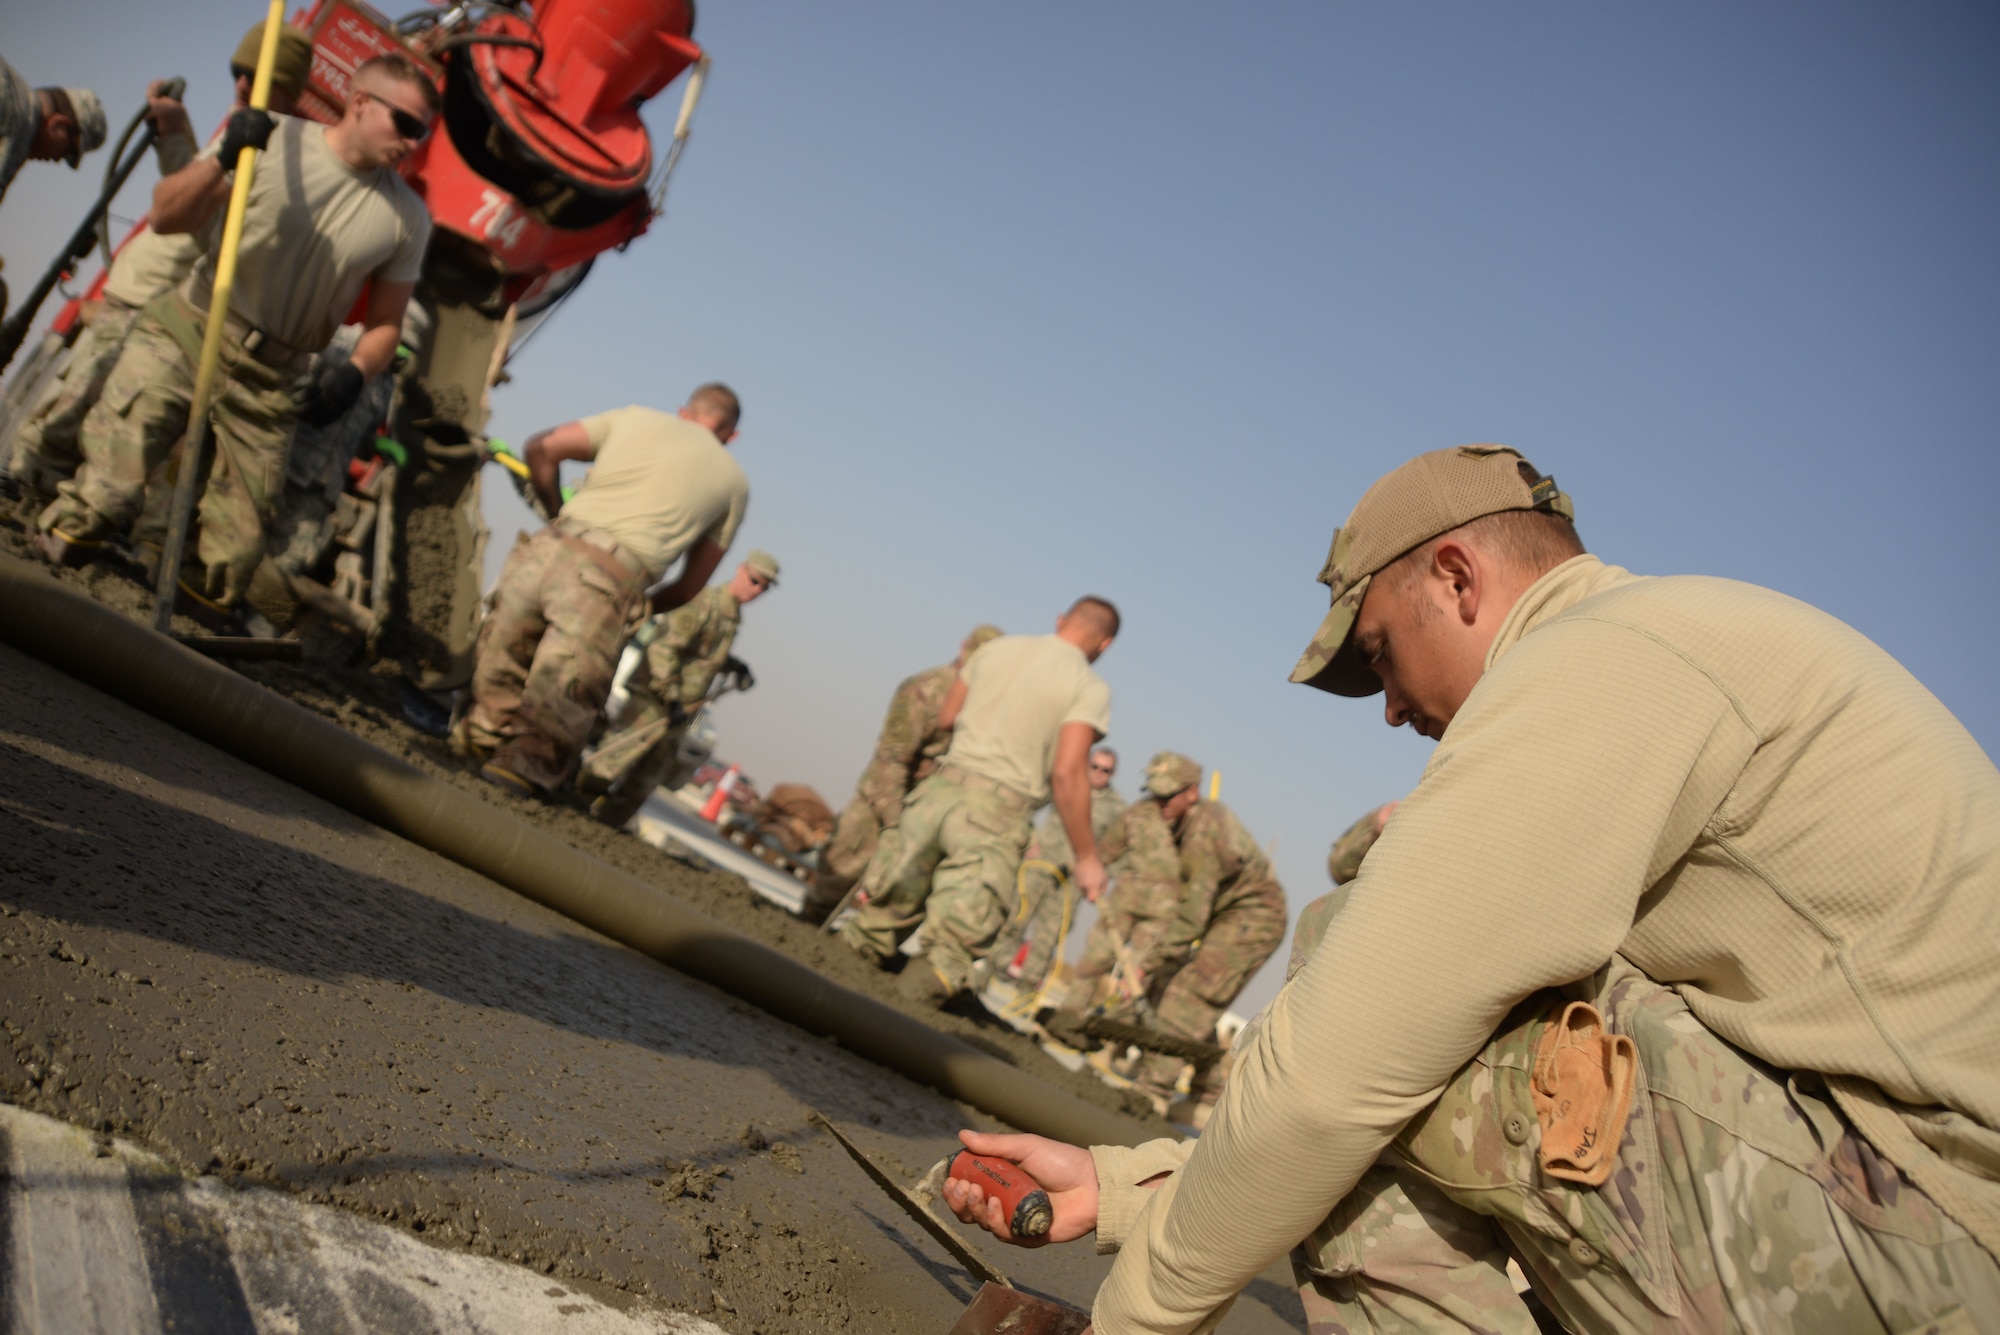 Staff Sgt. Jared Hendrickson, a heavy equipment operator assigned to the 332nd Civil Engineer Squadron, smooths out a concrete slab at an undisclosed loaction in Southwest Asia Nov. 28, 2017. One of the primary jobs of a Dirt Boy is to keep the runway safe and reliable through runway repair. Hendrickson and other members of the team work around the clock to ensure U.S. and Coalition forces are able to take off and land on this busy runway. (U.S. Air Force photo by Senior Master Sgt. Cohen A. Young)